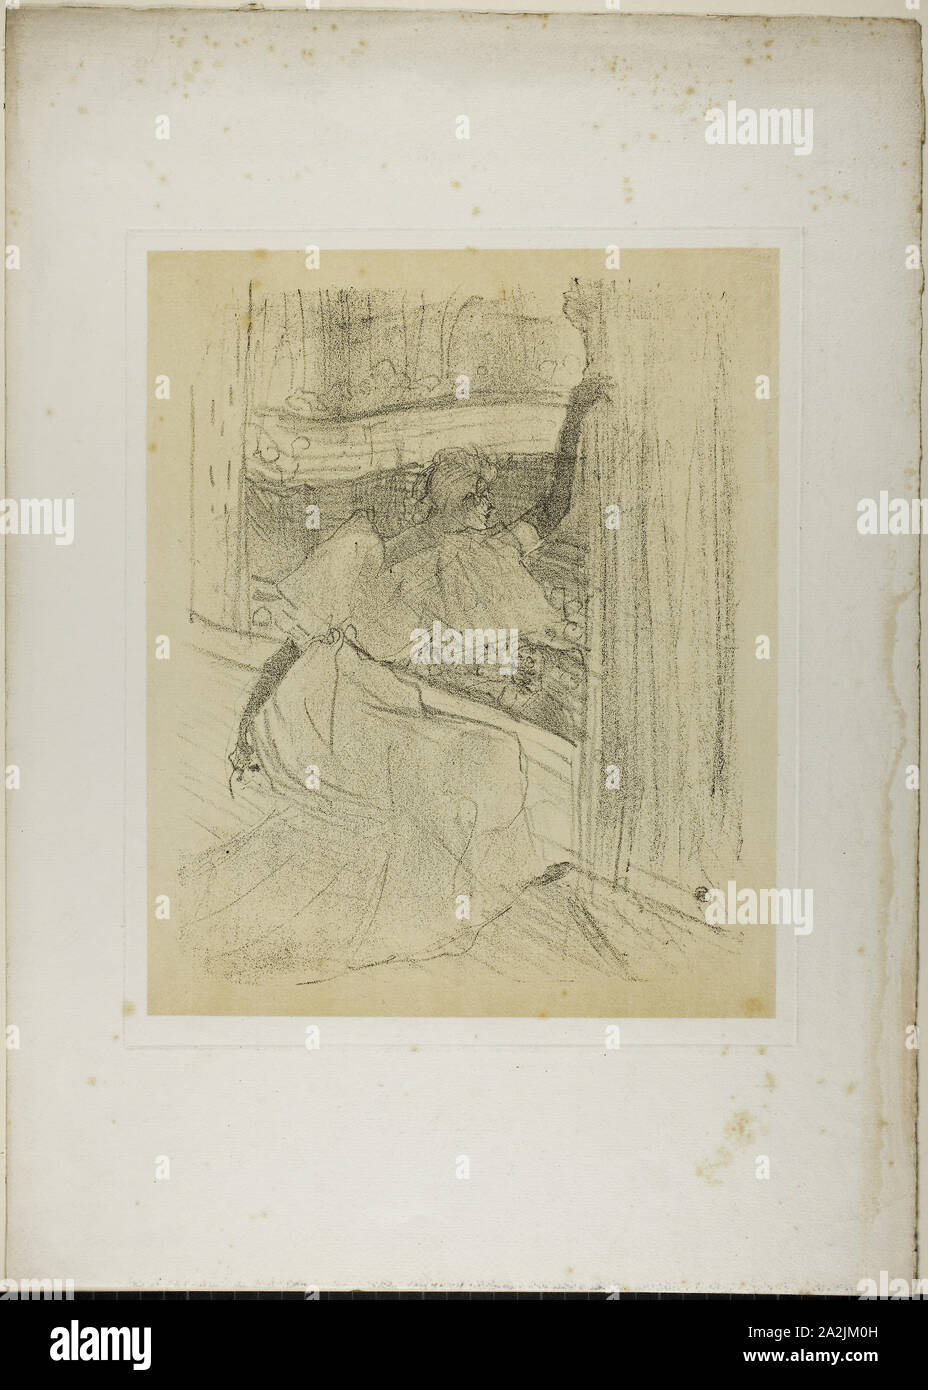 Yvette Guilbert Taking a Bow, from Yvette Guilbert, 1898, Henri de Toulouse-Lautrec, French, 1864-1901, France, Lithograph with beige tint stone, on ivory laid paper, 324 × 265 mm (image), 541 × 387 mm (sheet Stock Photo